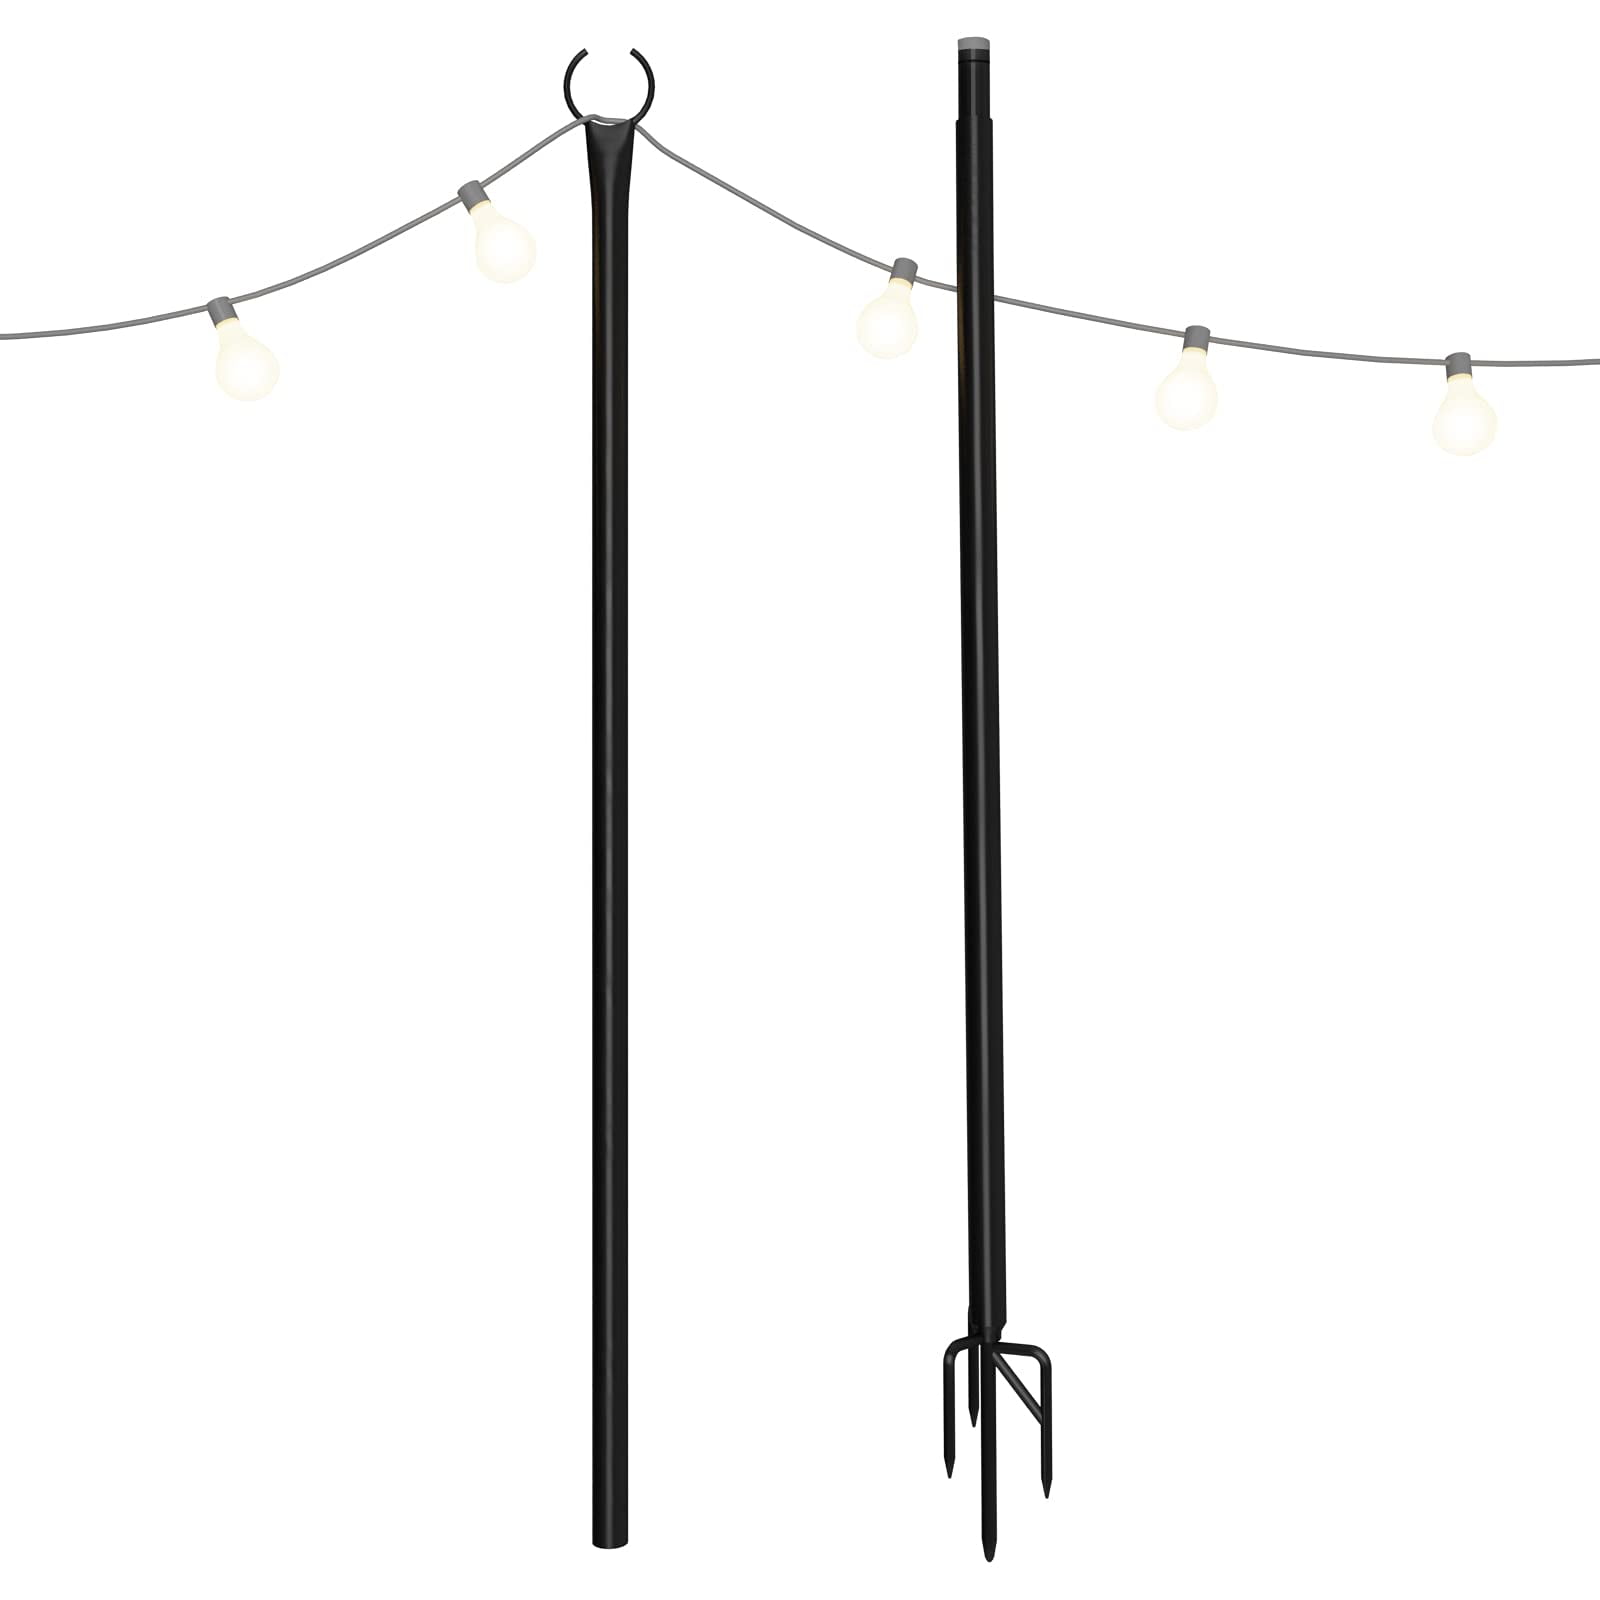 Holiday Styling Outdoor String Light Pole - Metal Poles with Hooks for Hanging String Lights in Garden, 1 Pole - Walmart.com